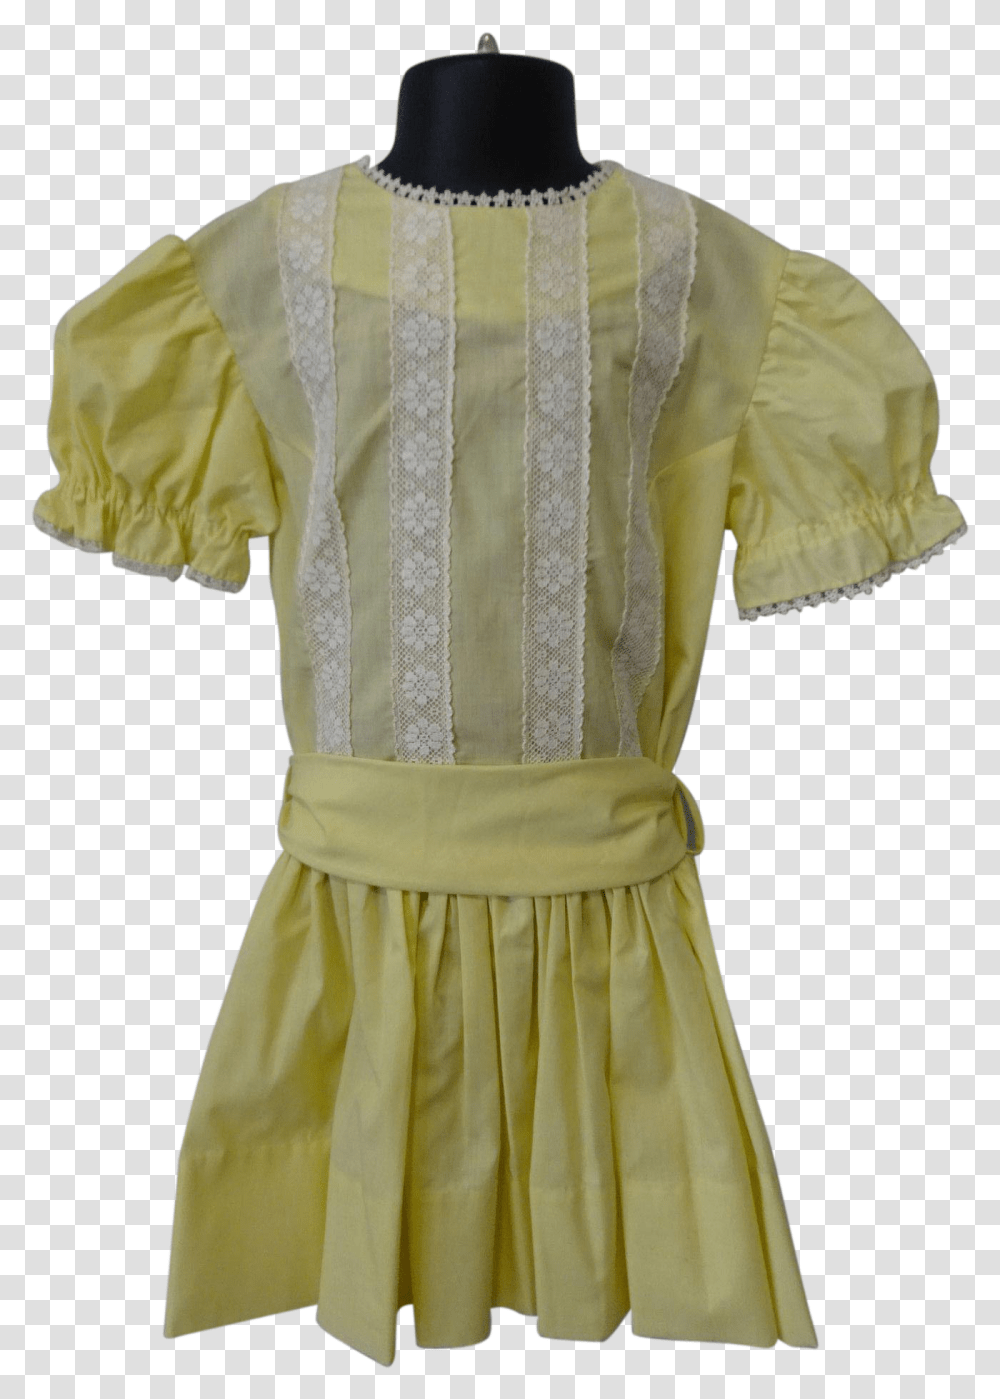 Yellow Cotton Girls Dress Spring Easter White Lace Day Dress, Apparel, Blouse, Skirt Transparent Png